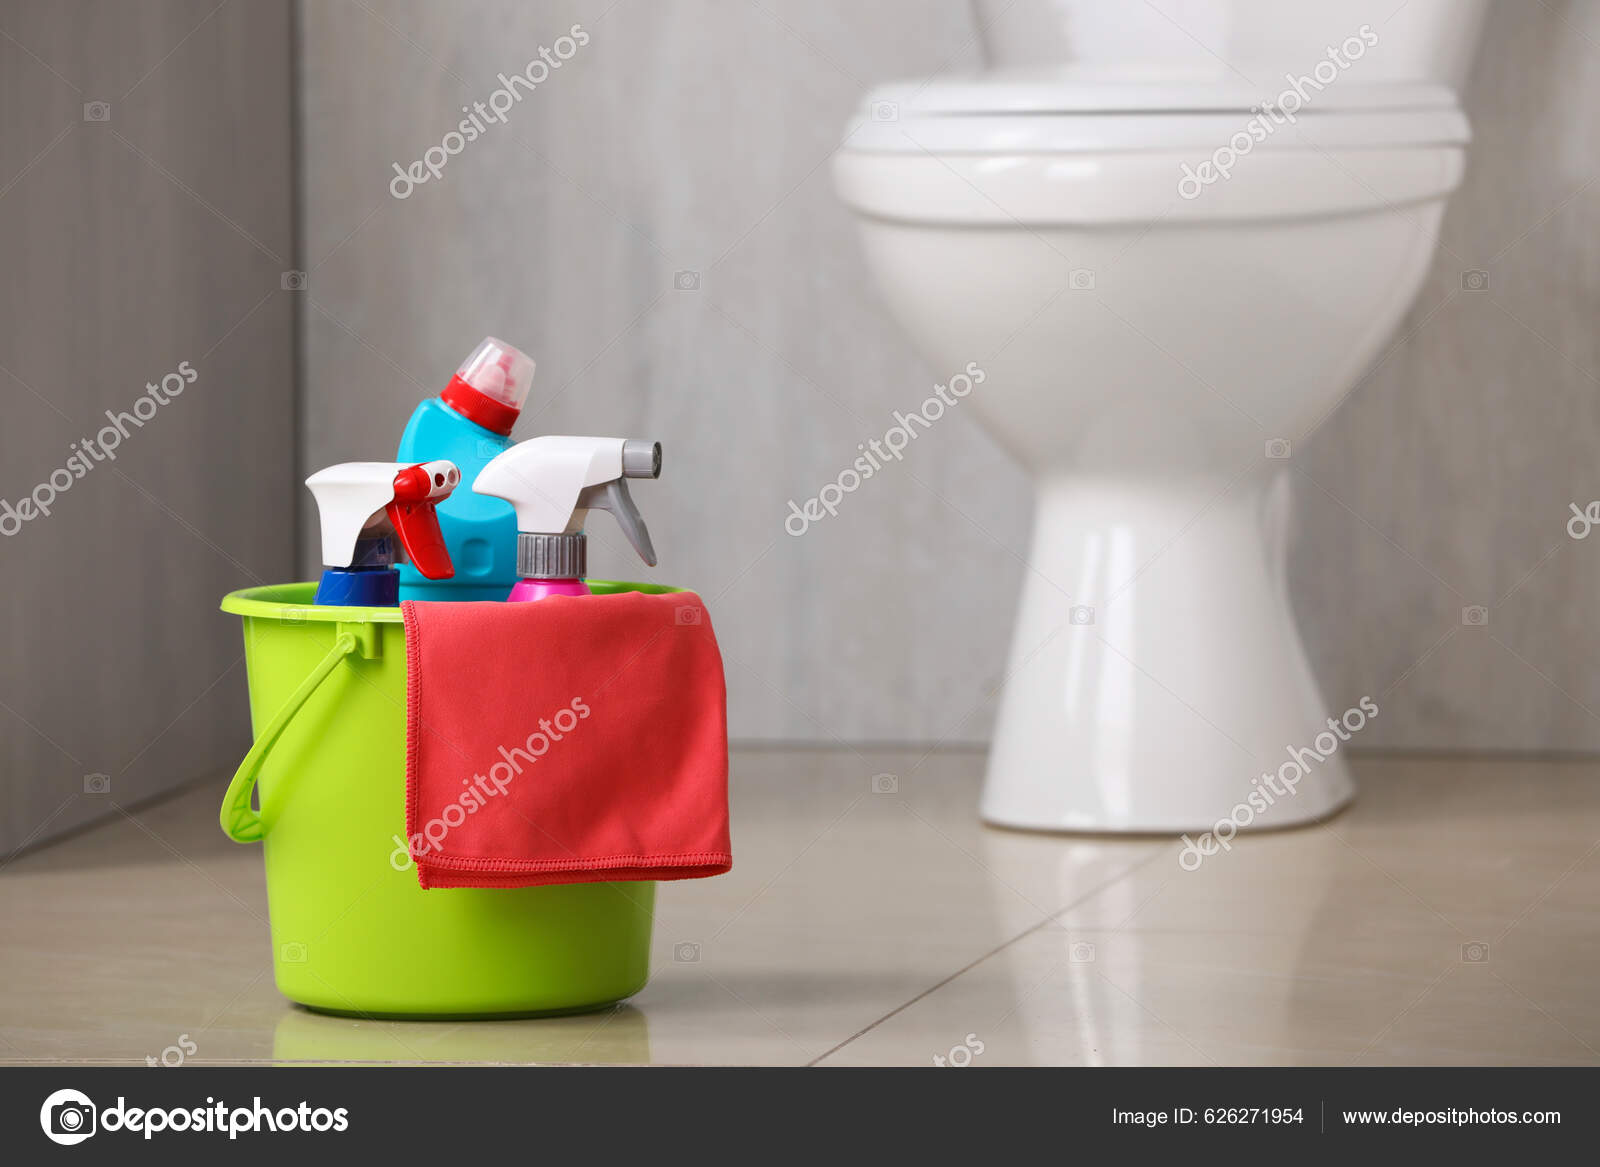 Cleaning Supplies Toilet Bowl Bathroom Space Text Stock Photo by